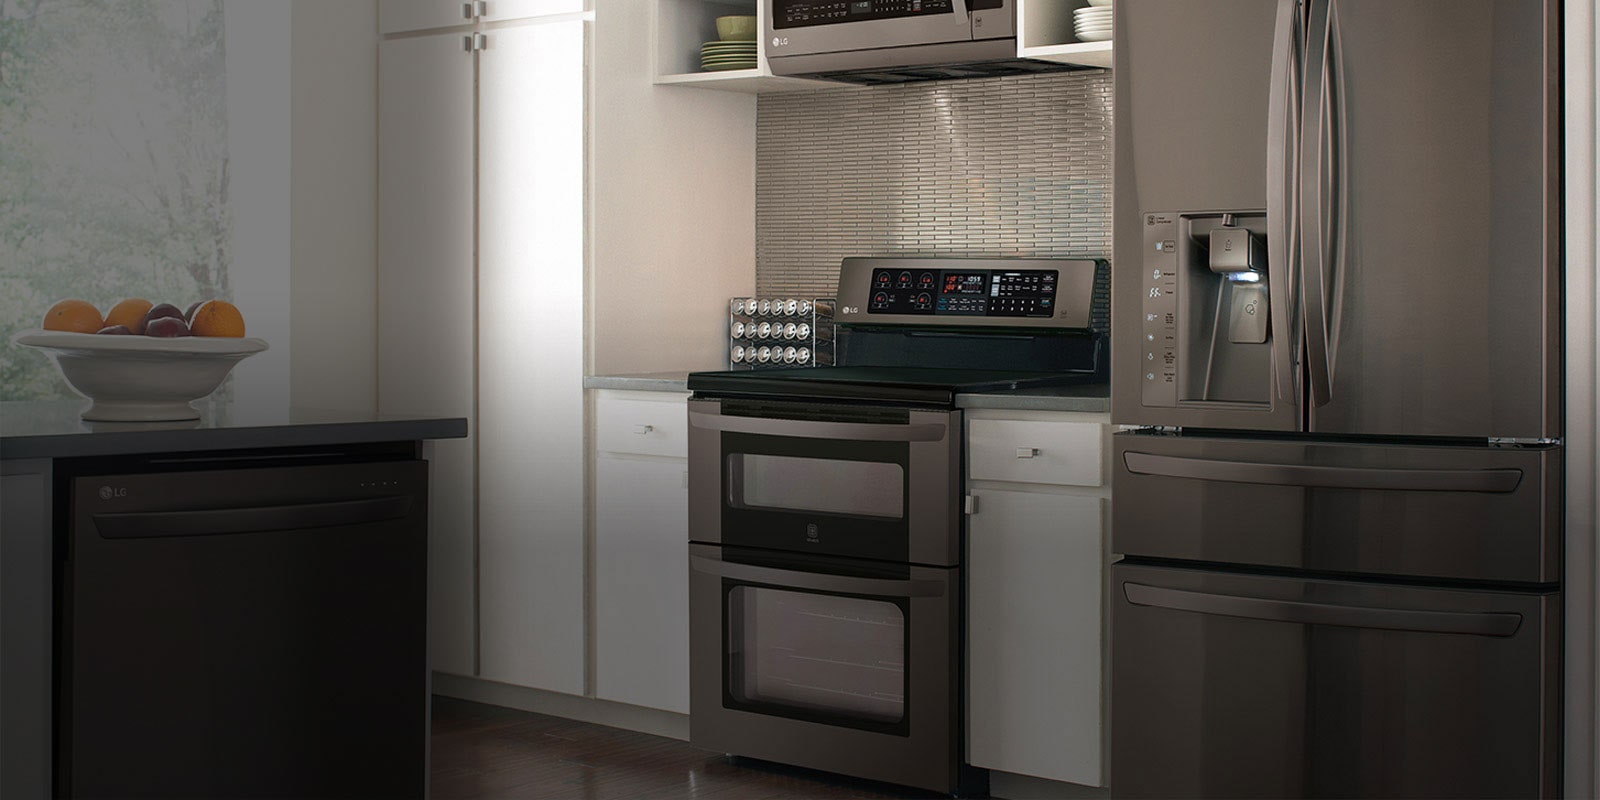 Built in Microwaves: Compare LG Microwave Ovens | LG UAE